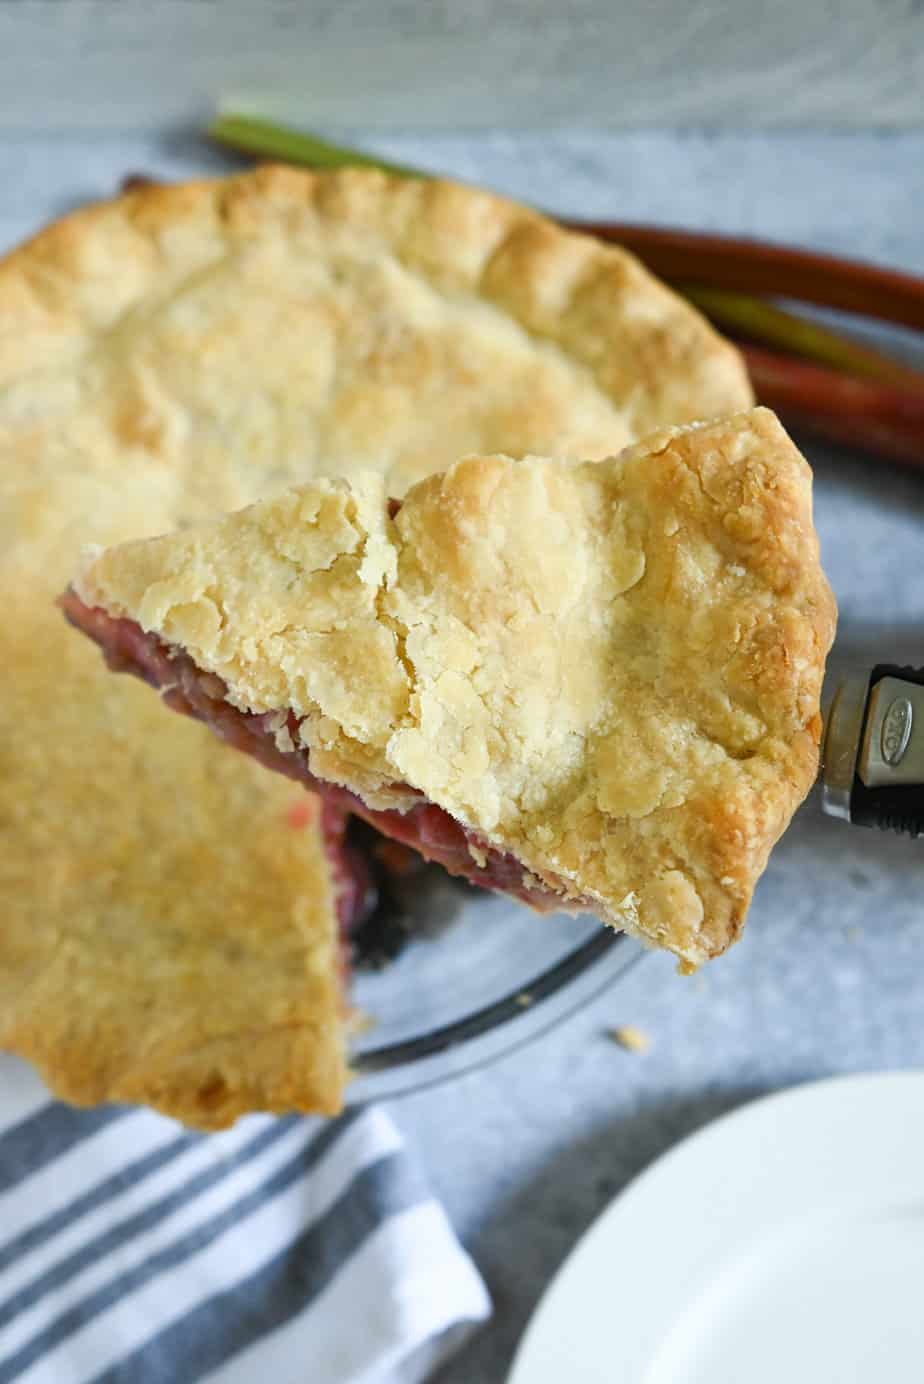 Pie server holding up a slice of rhubarb pie from the pie plate.